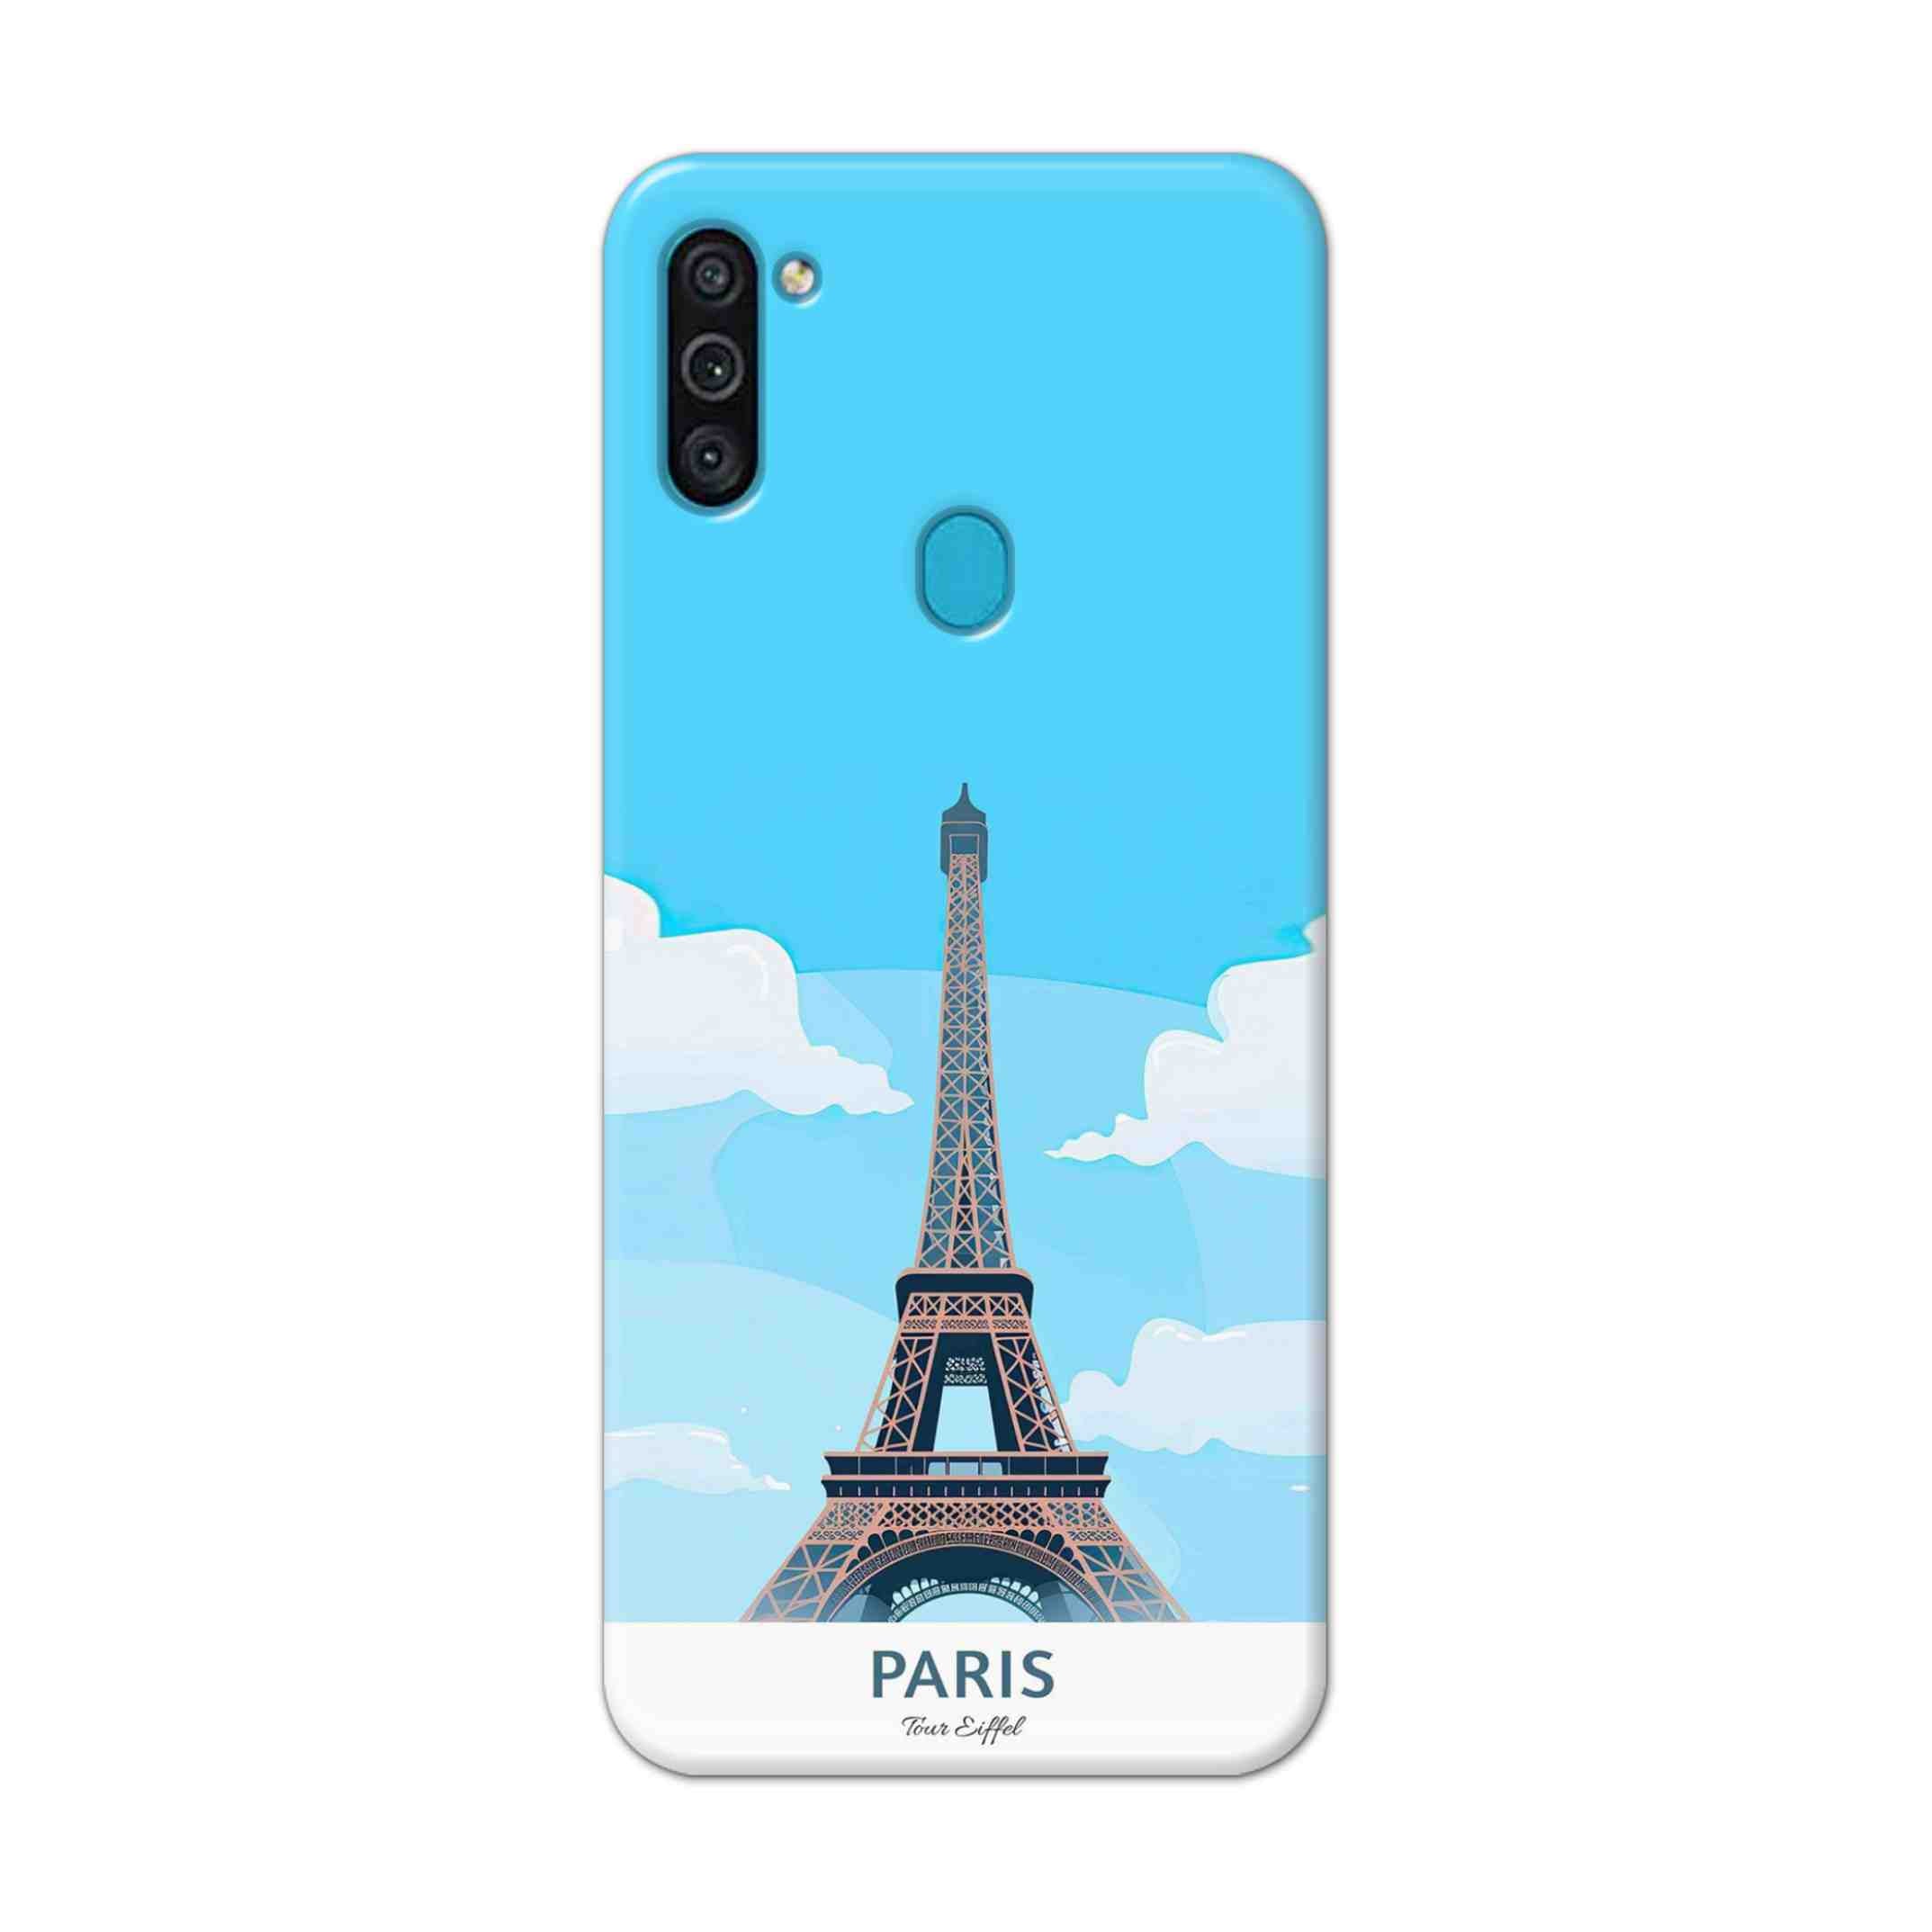 Buy Paris Hard Back Mobile Phone Case Cover For Samsung Galaxy M11 Online